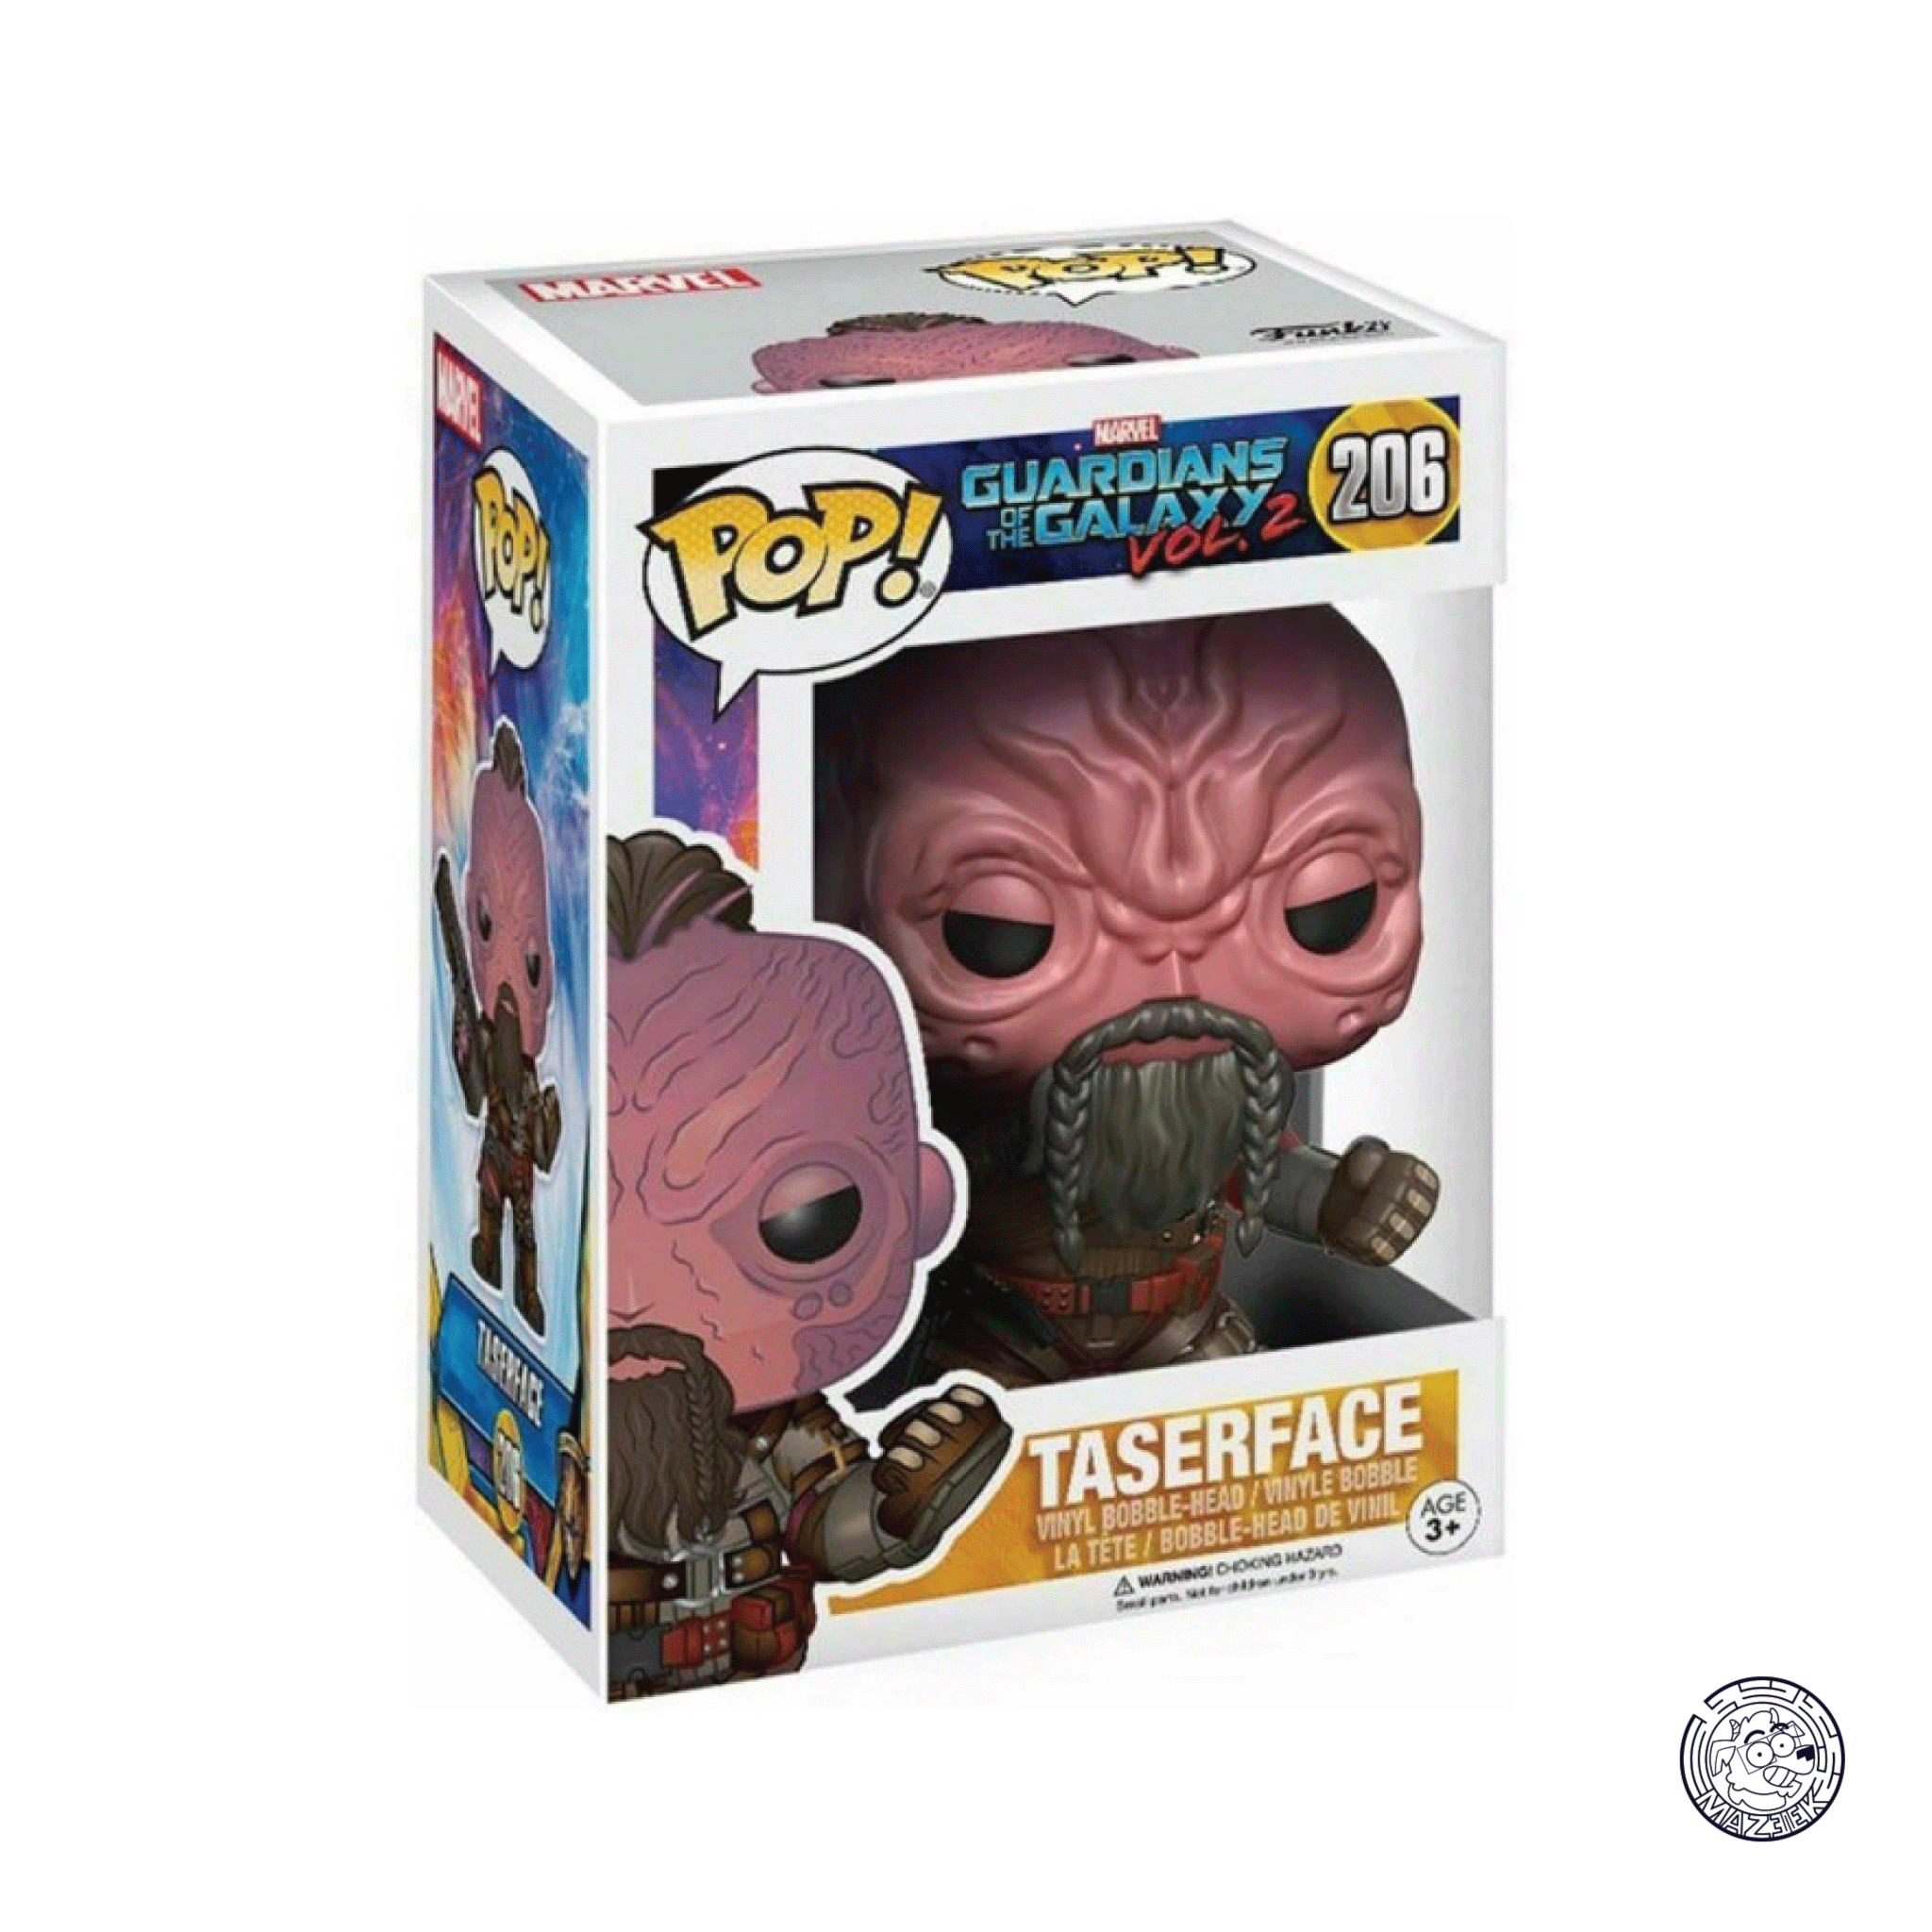 Funko POP! Guardians of the Galaxy 2: Taserface 206